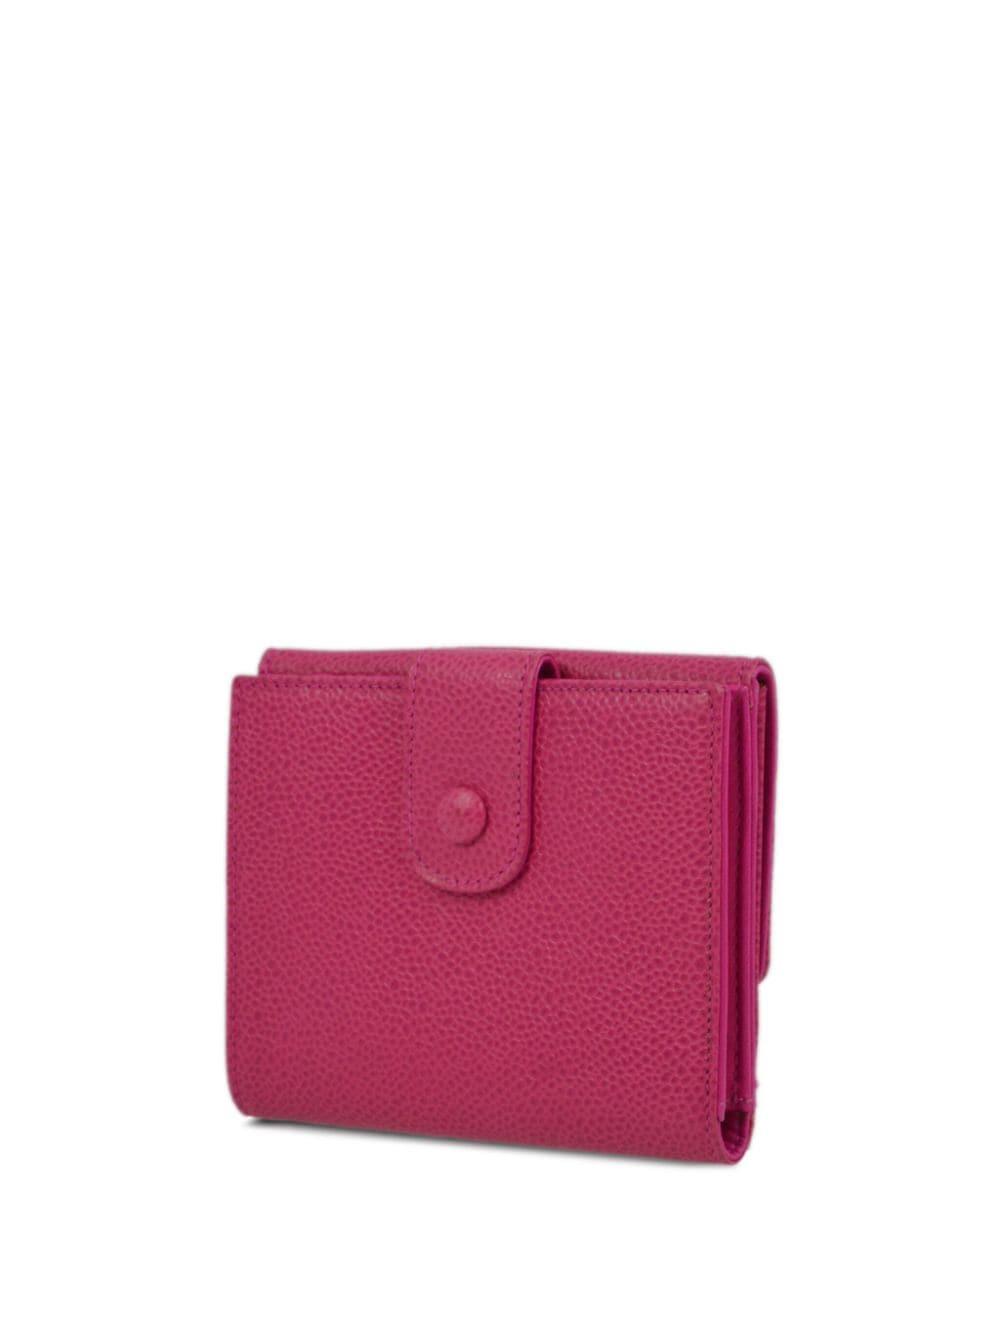 CHANEL Pre-Owned 1995 CC caviar leather wallet - Pink